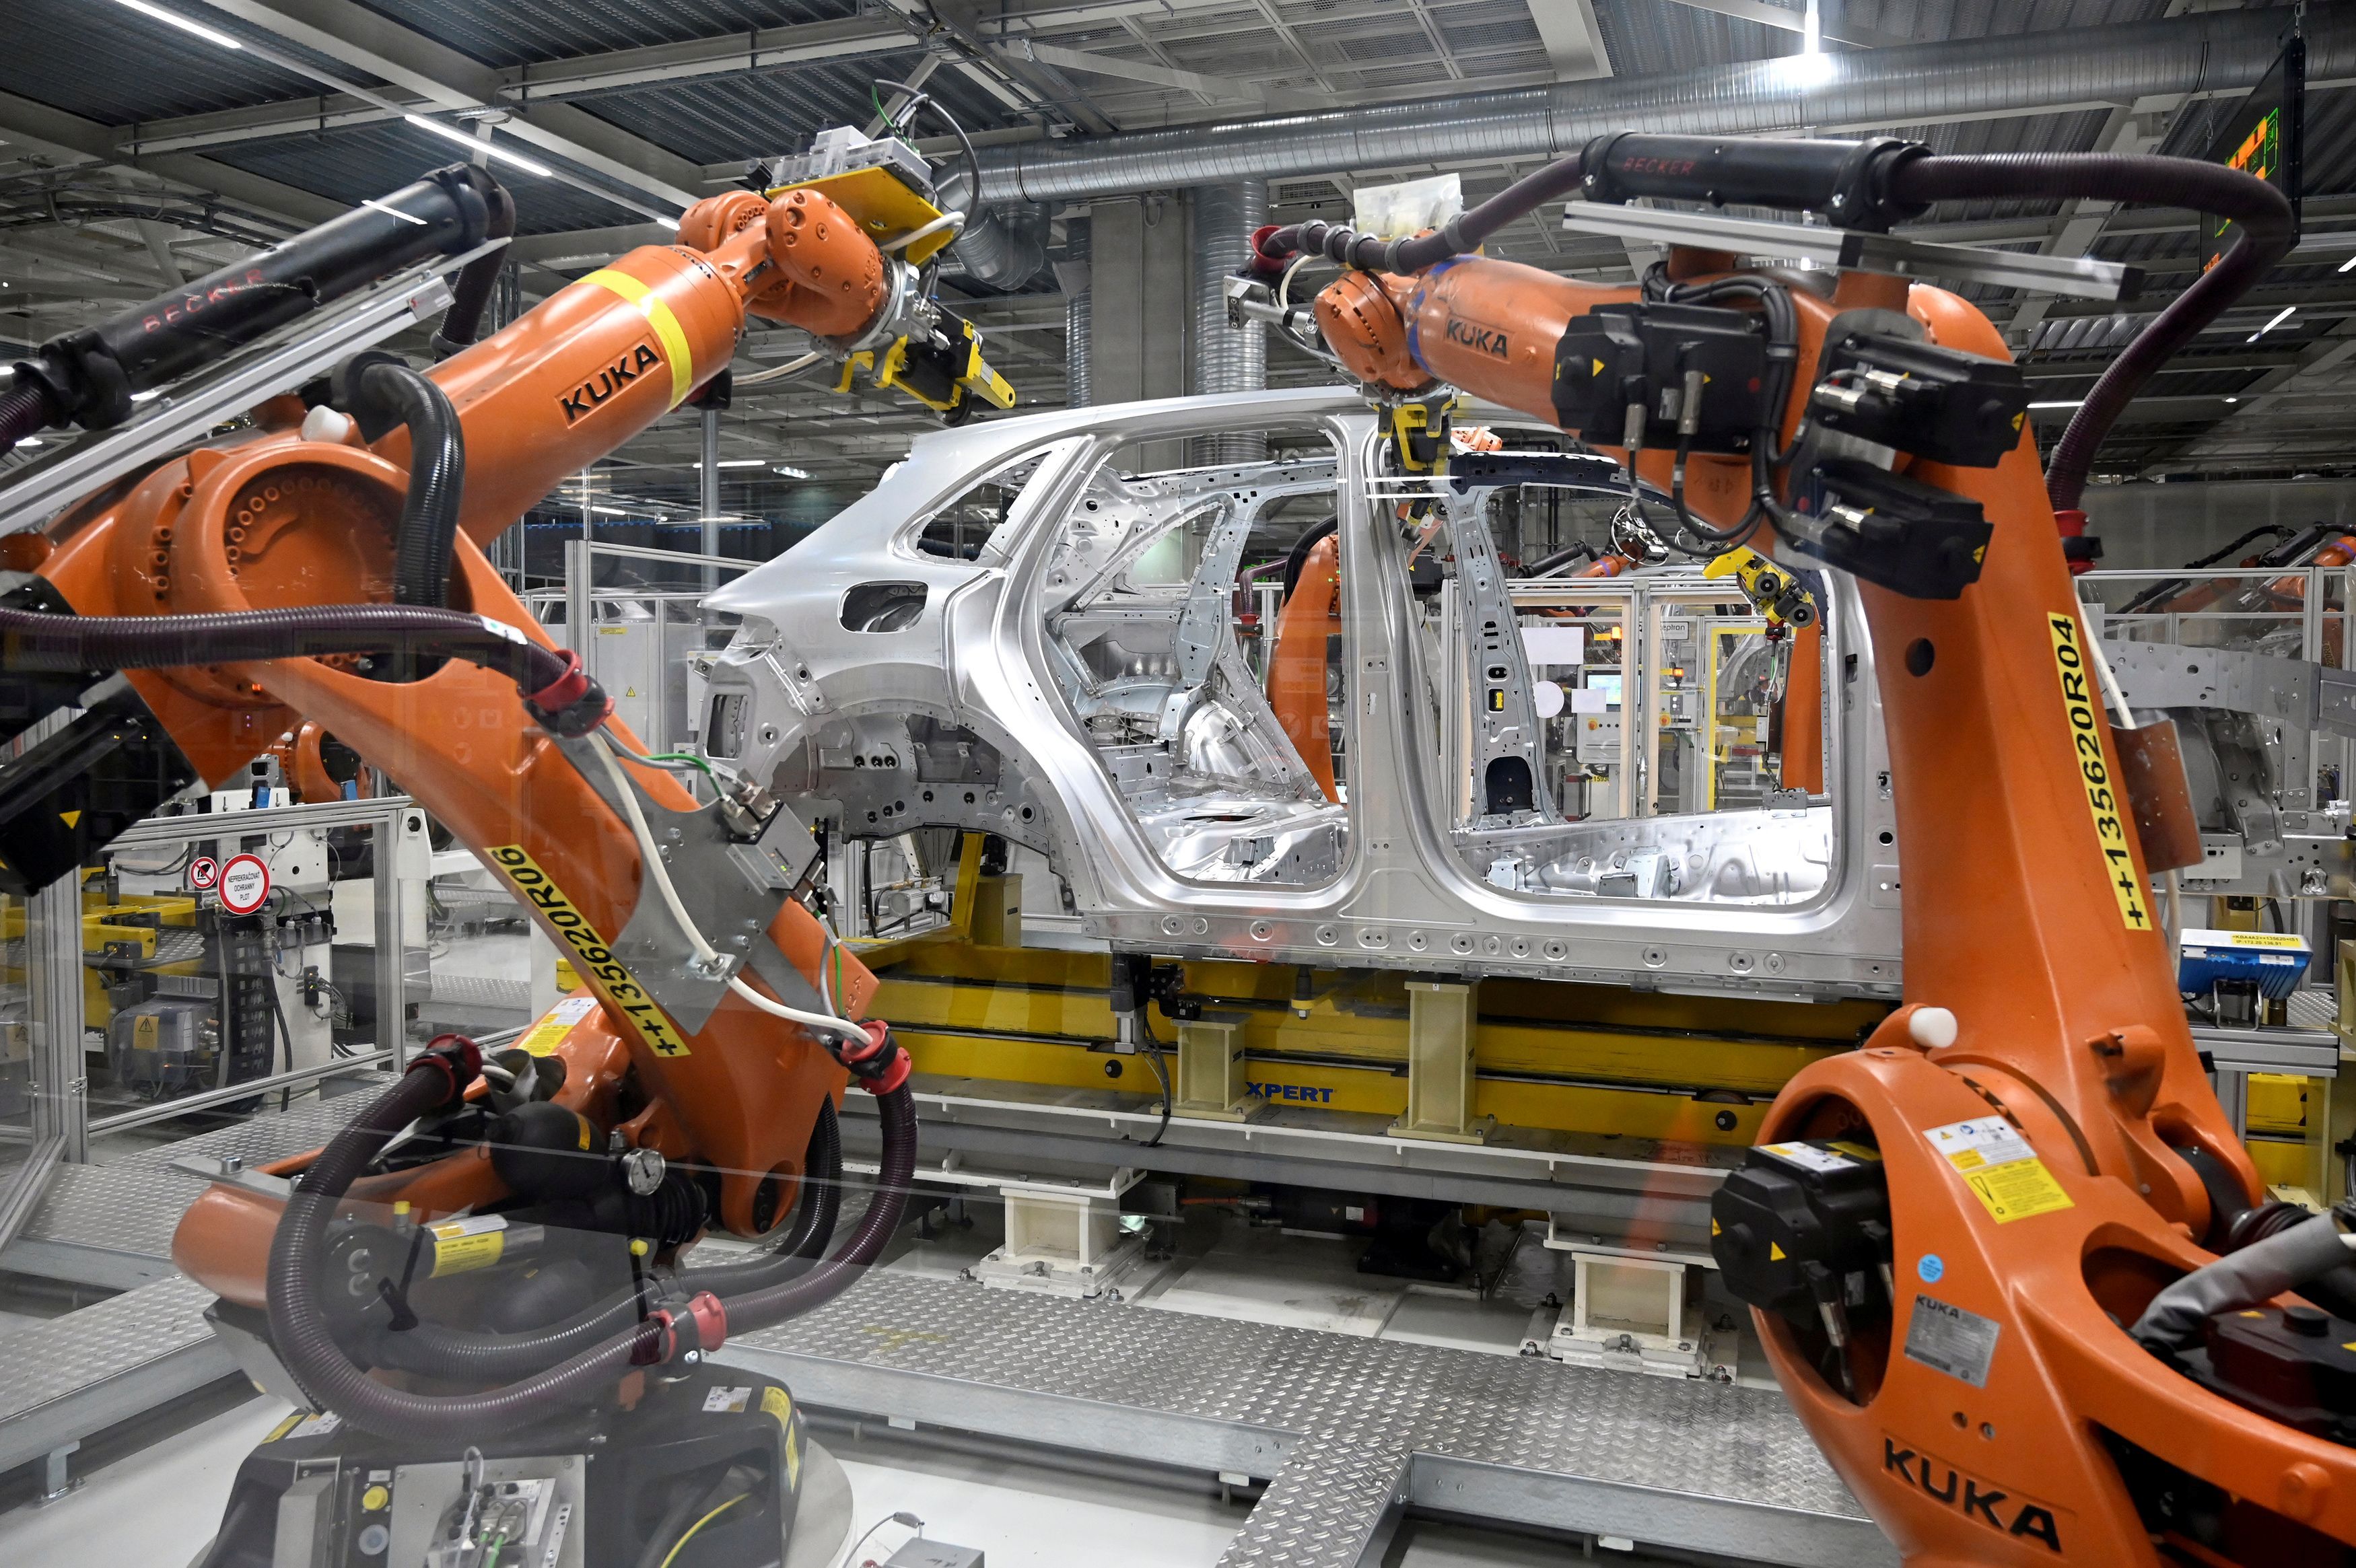 Robotic arms are seen on an assembly line as the Volkswagen construction plant reopens after closing down last month due to the coronavirus disease (COVID-19) outbreak in Bratislava